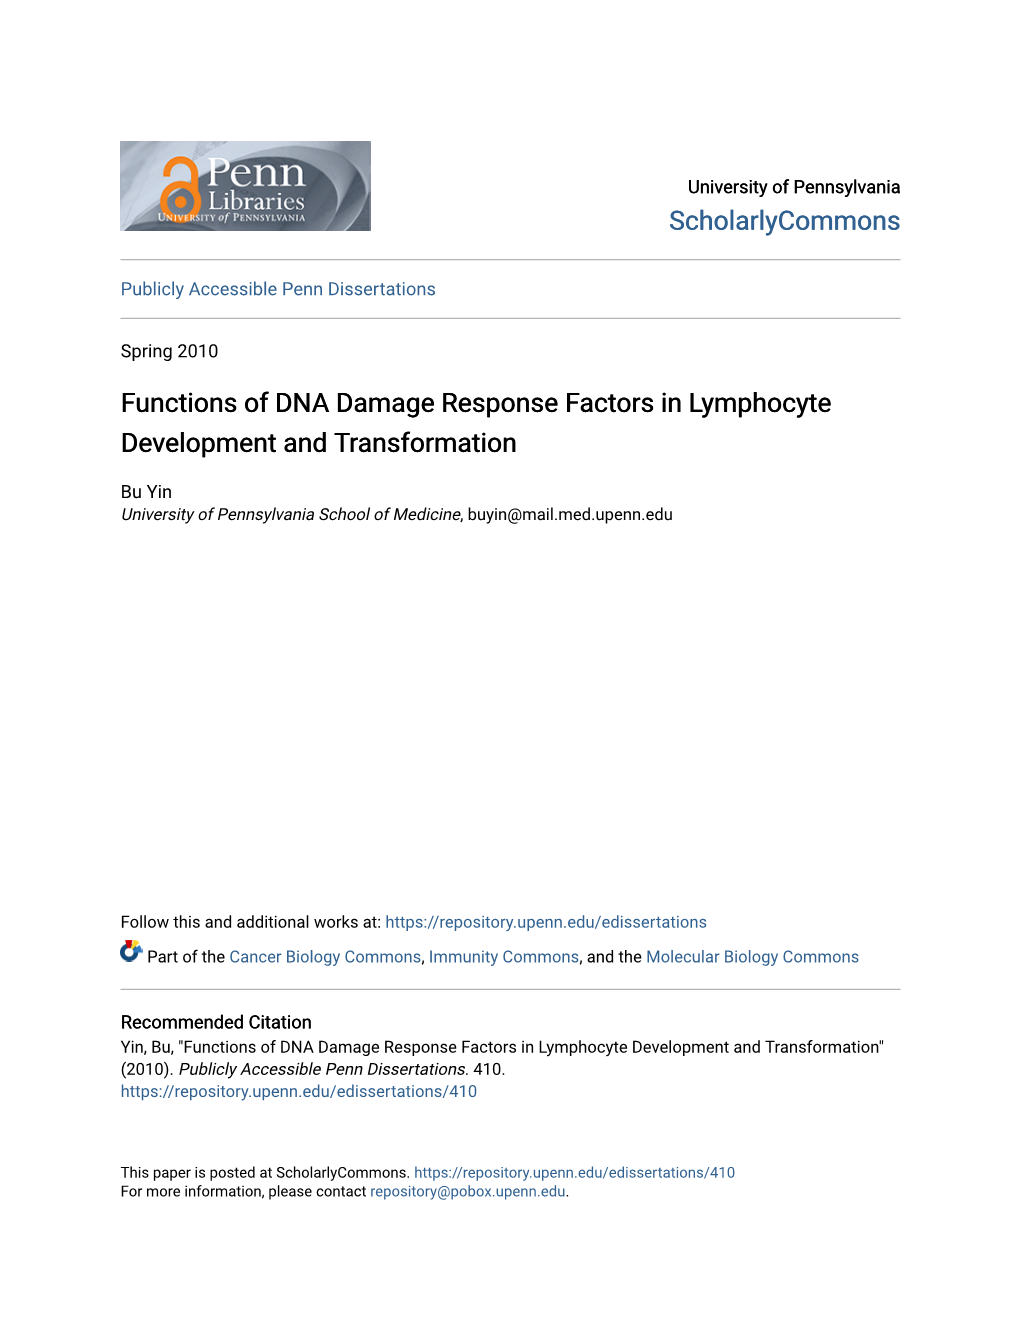 Functions of DNA Damage Response Factors in Lymphocyte Development and Transformation